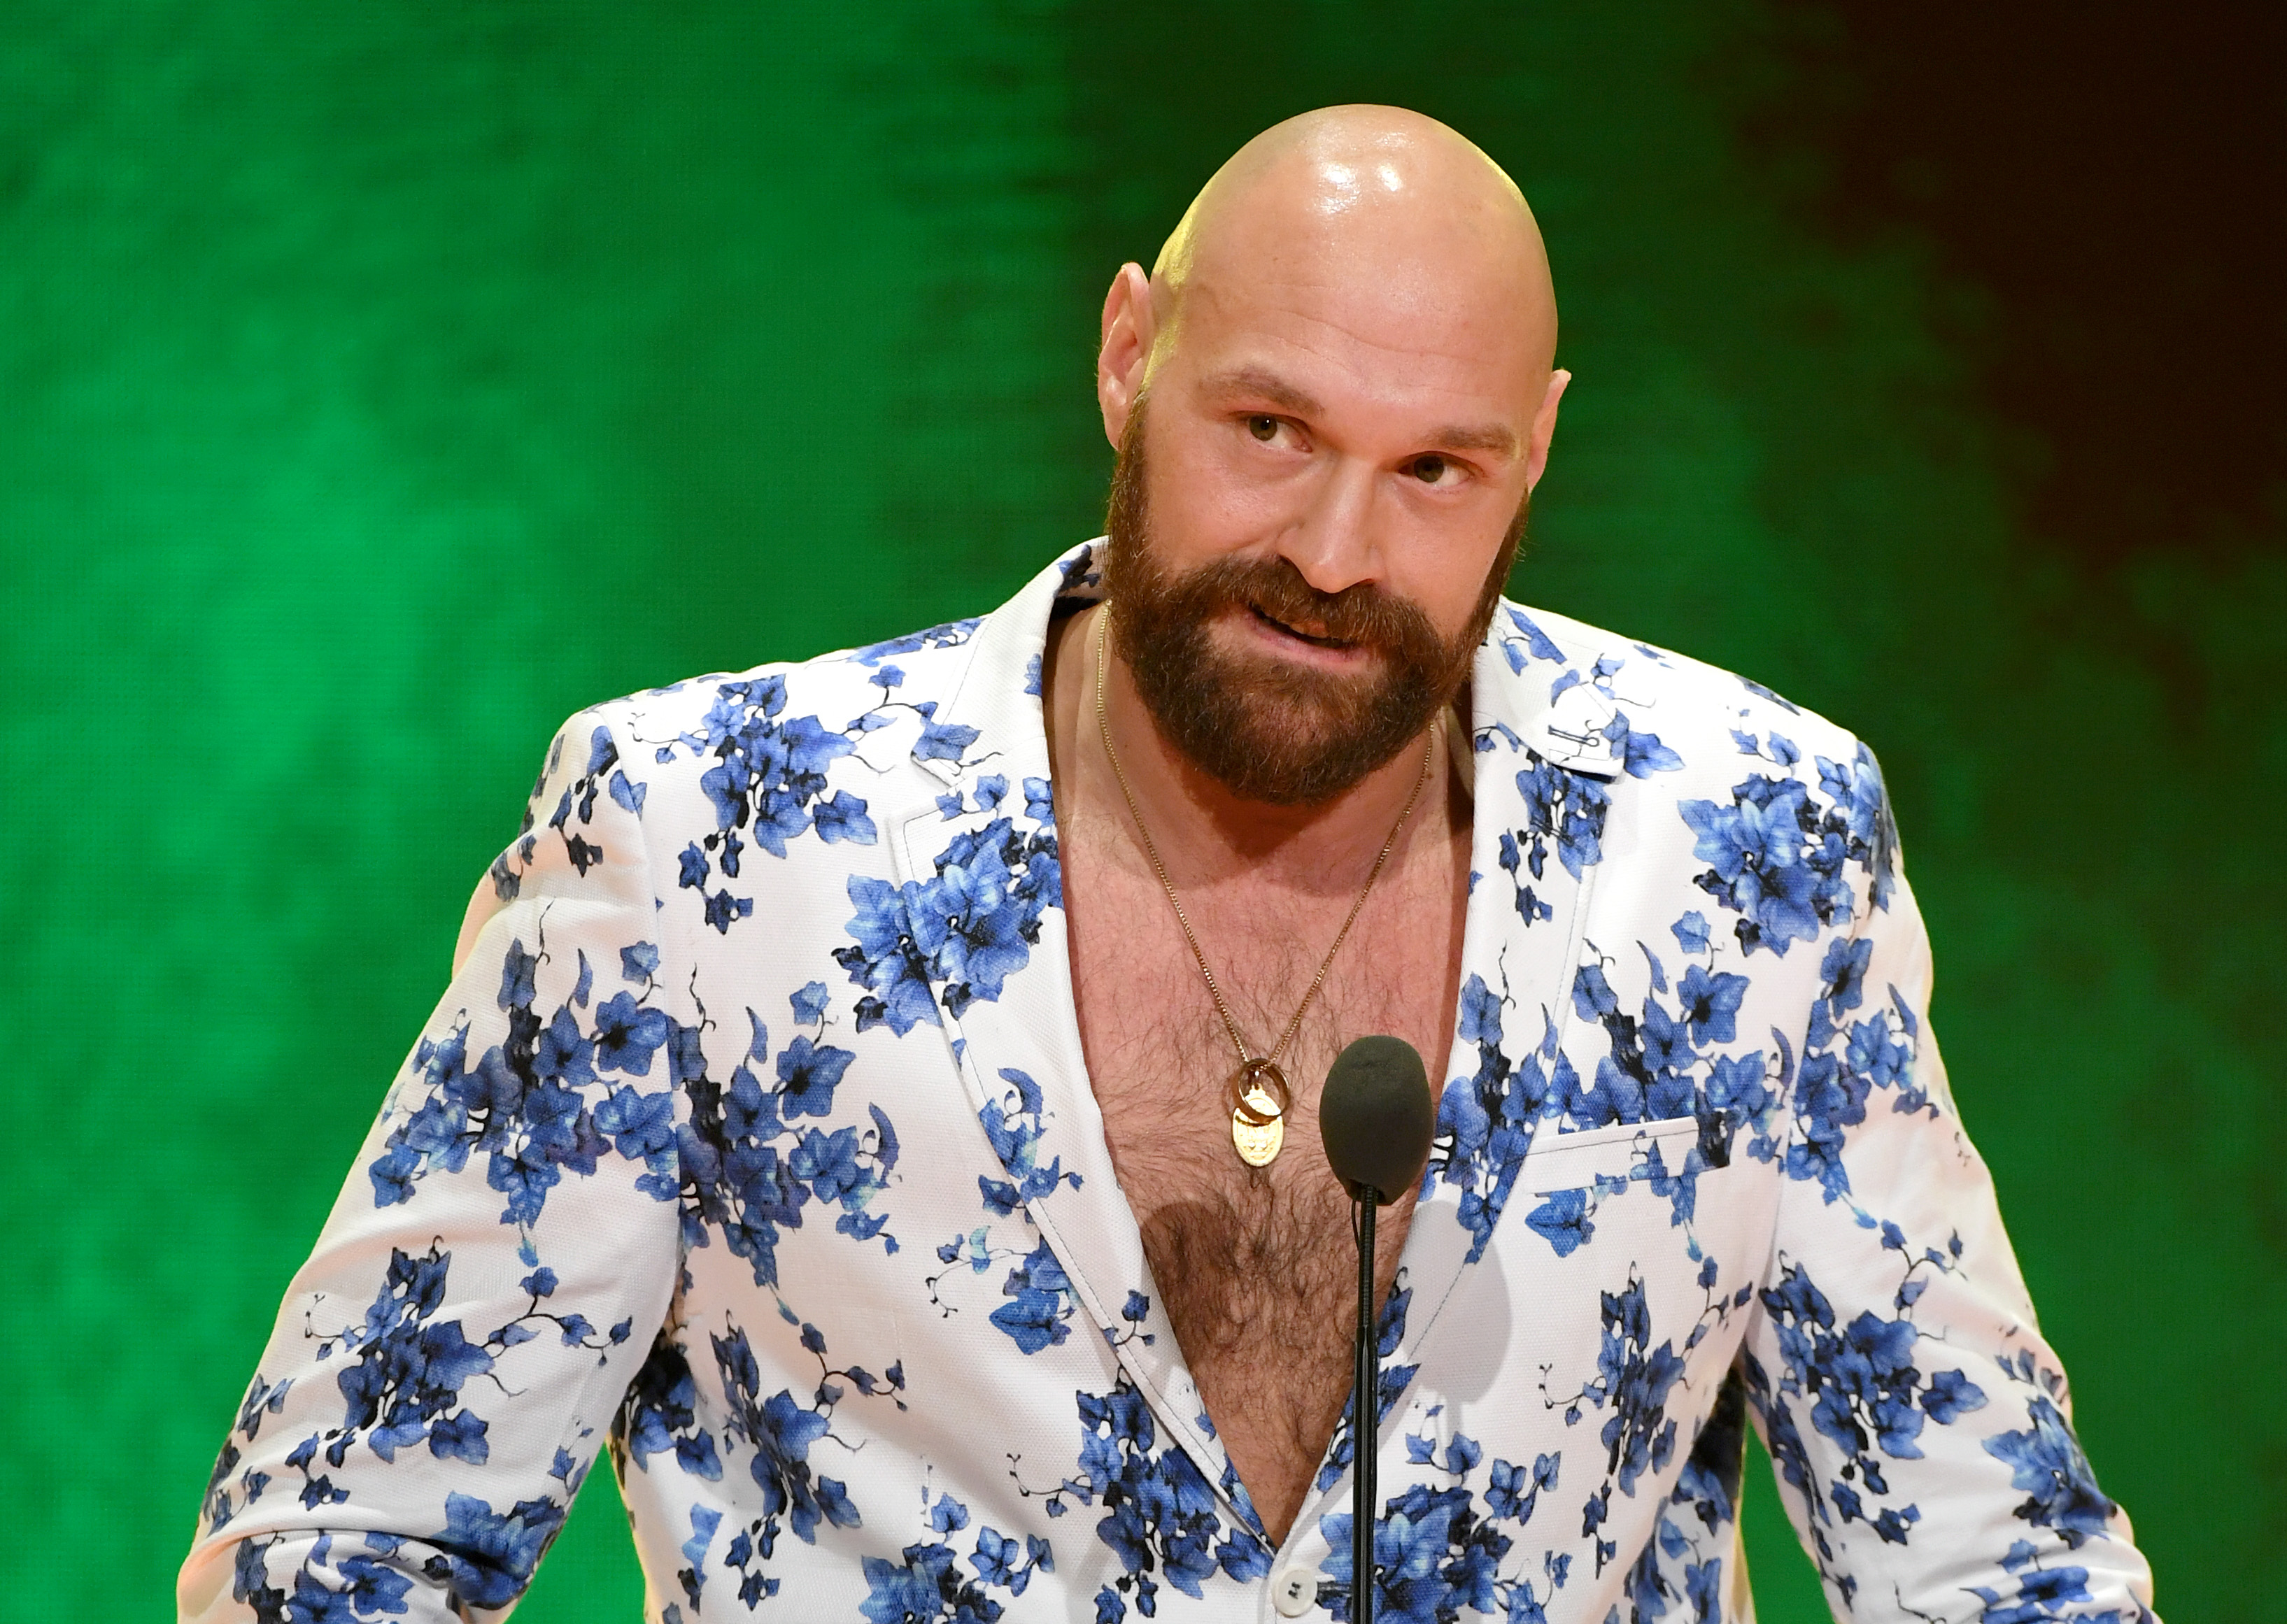 Tyson Fury Earned More From His WWE Appearance Than Any of His Boxing Matches